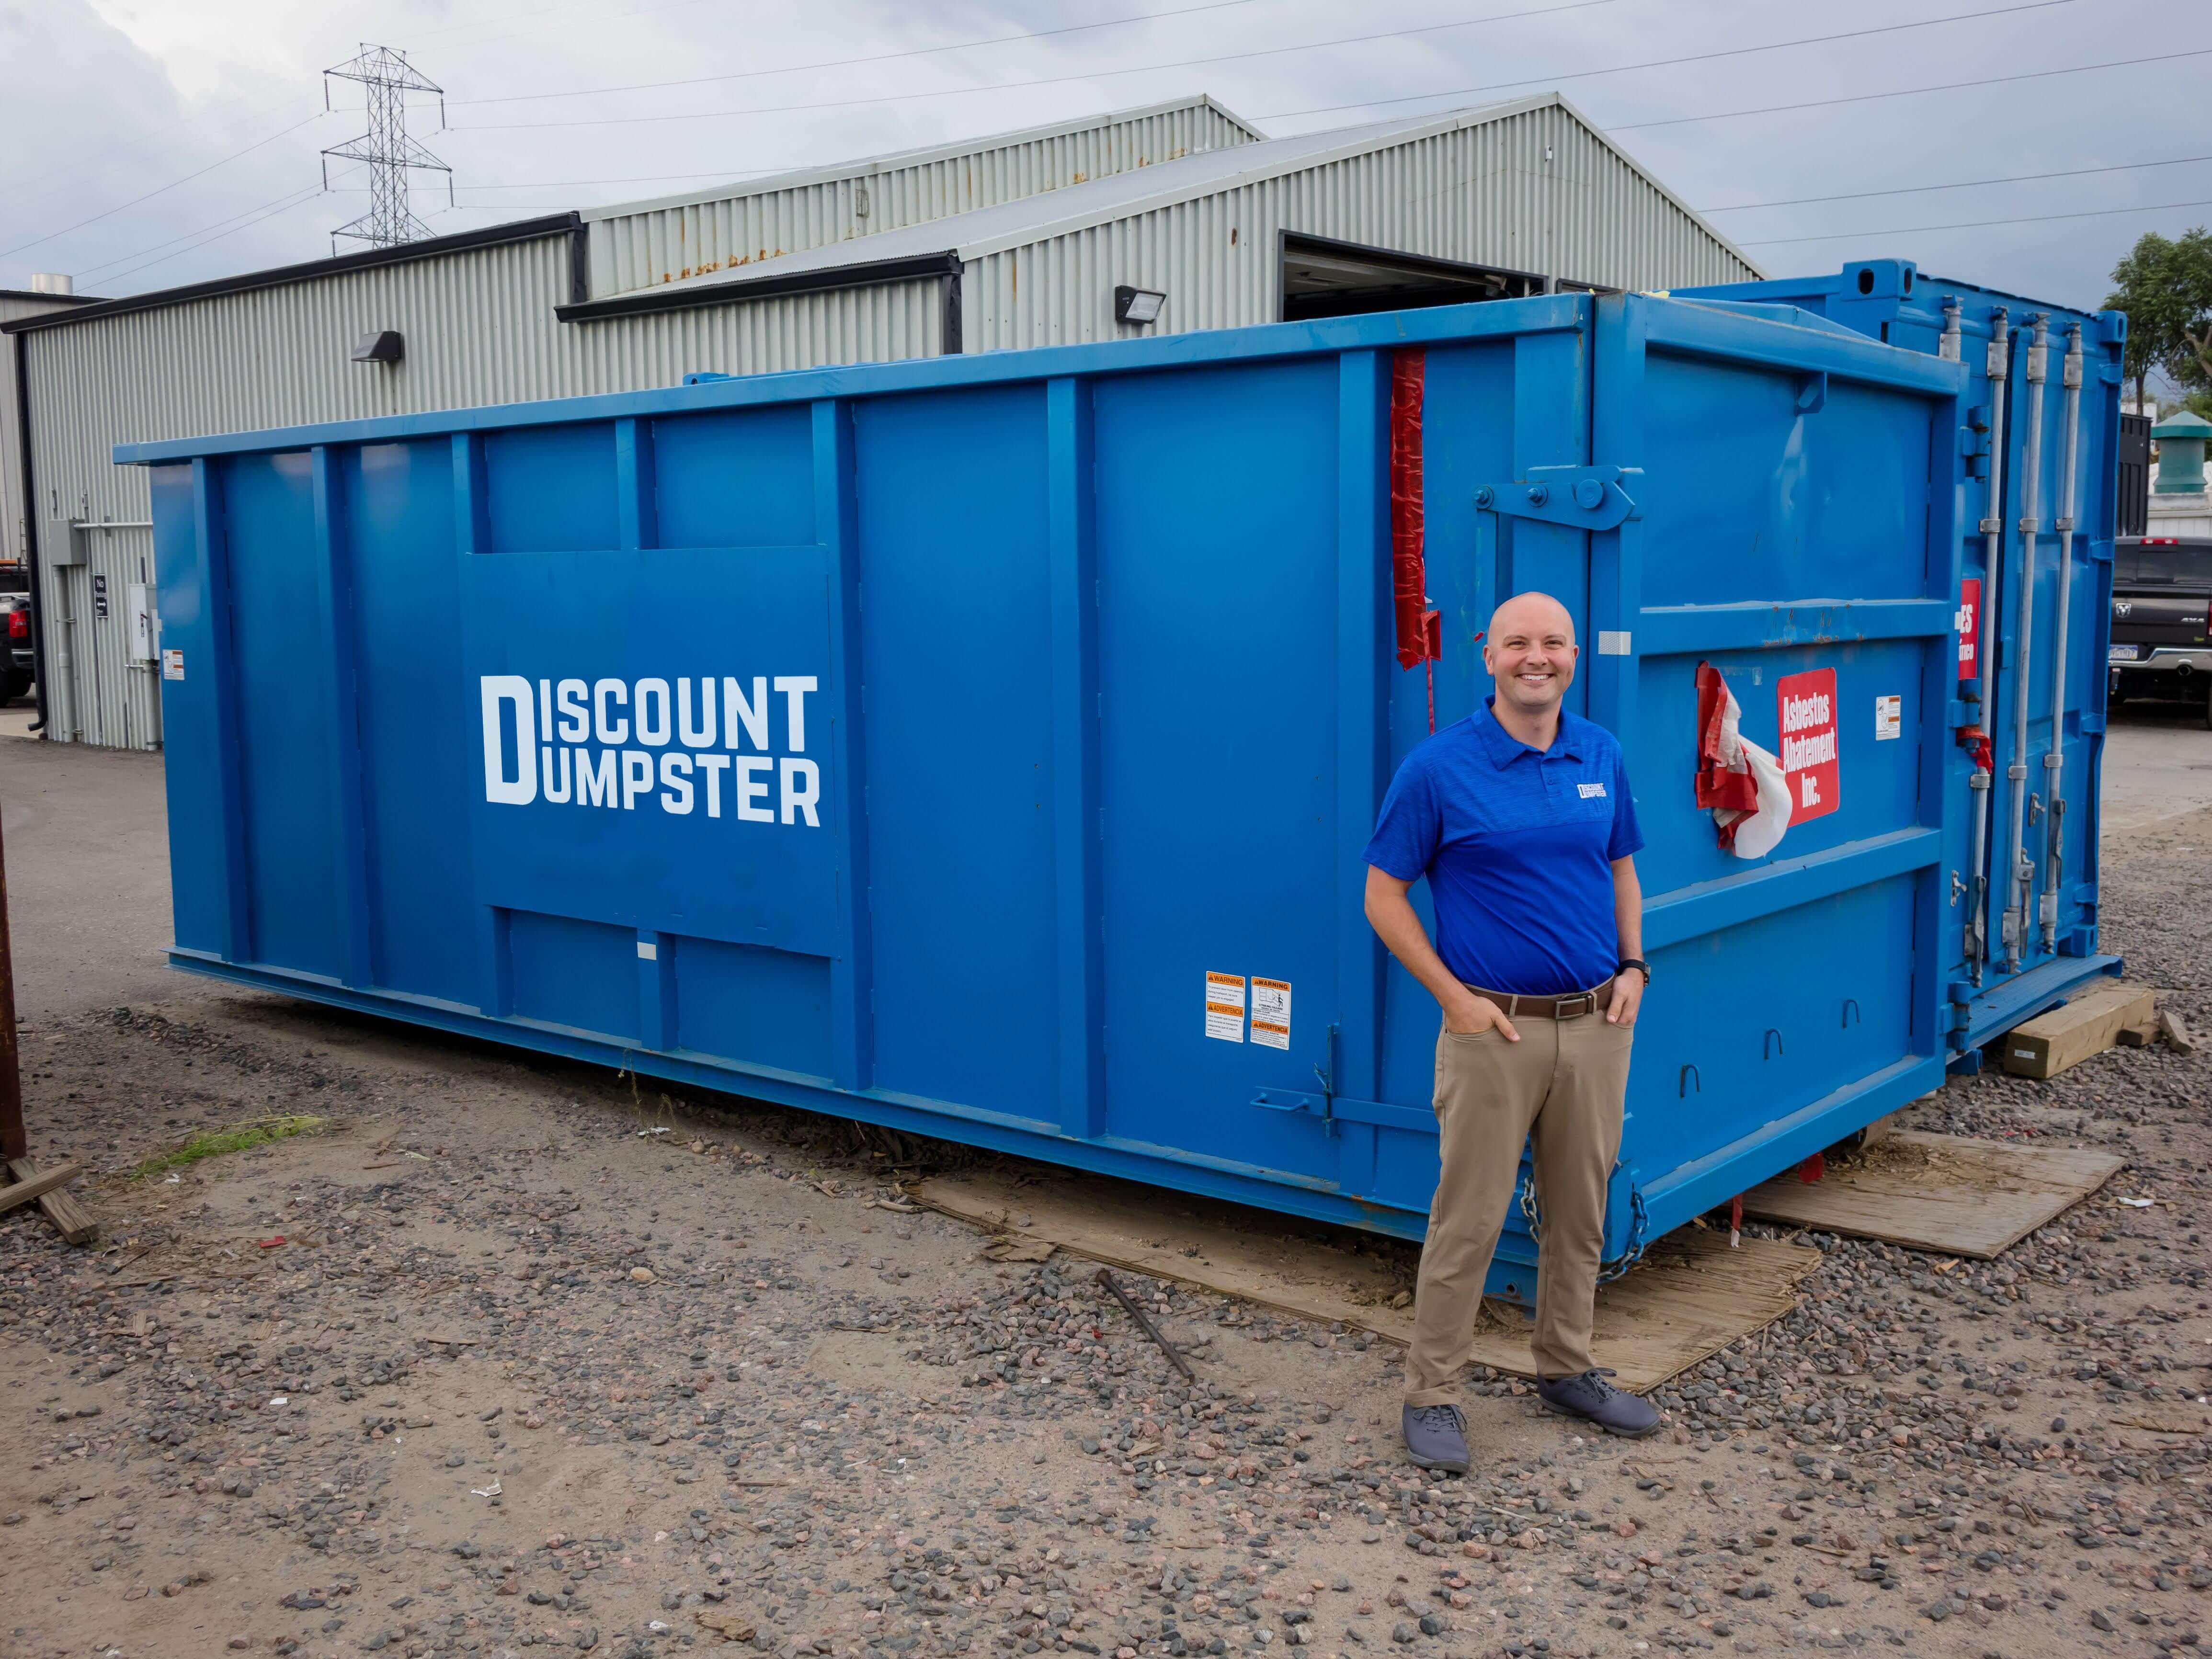 Call now to learn about our dumpster rental rates at discount dumpster in chicago il Discount Dumpster Chicago (312)549-9198